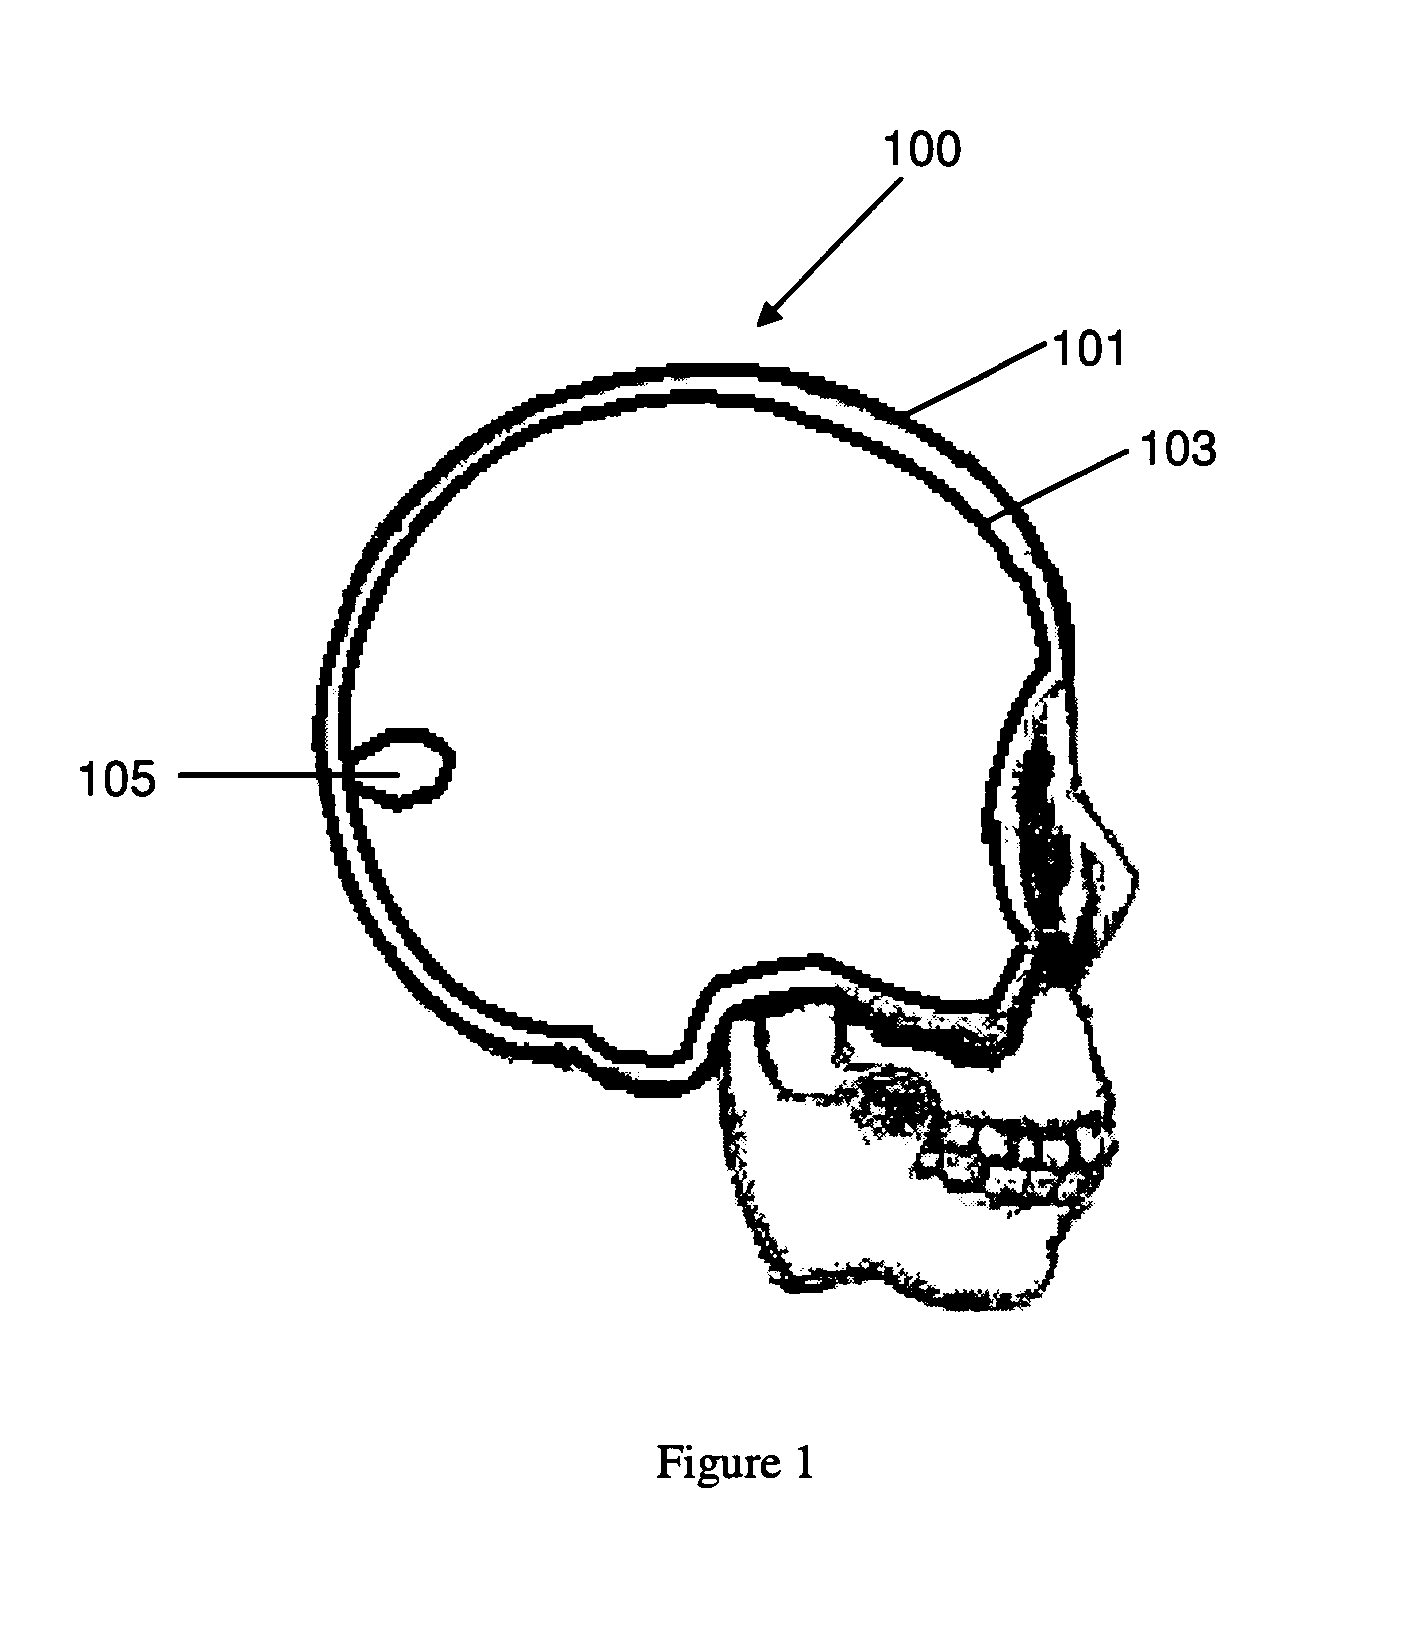 Method for manufacturing a three-dimensional anatomical structure